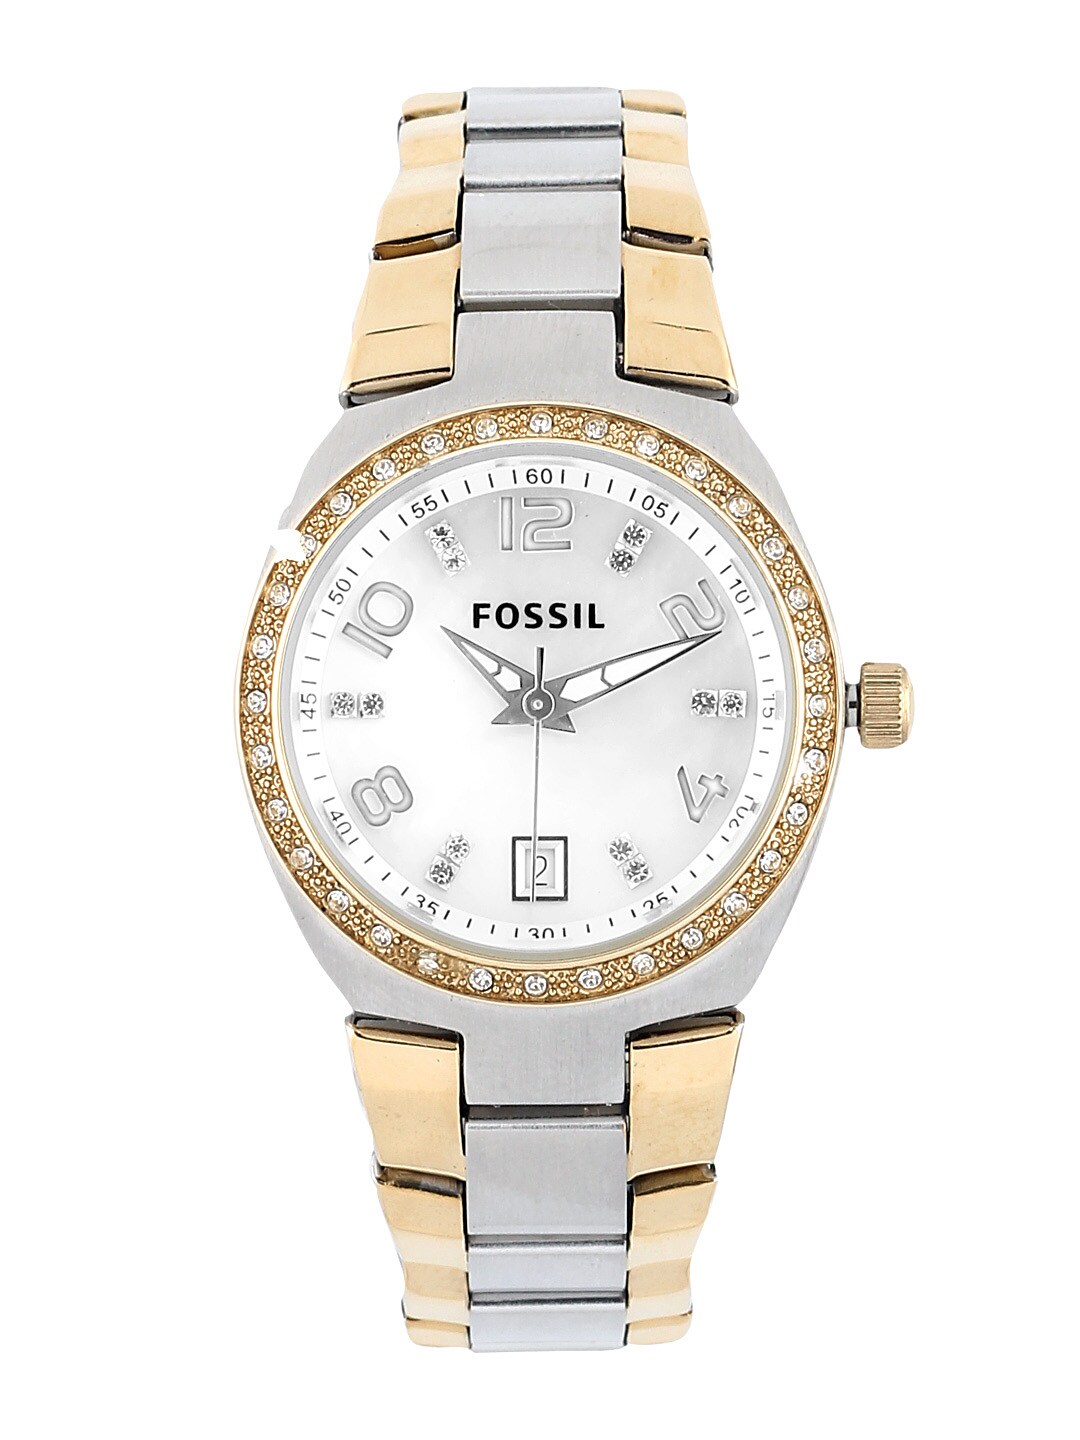 Fossil Women White Dial Watch AM4183